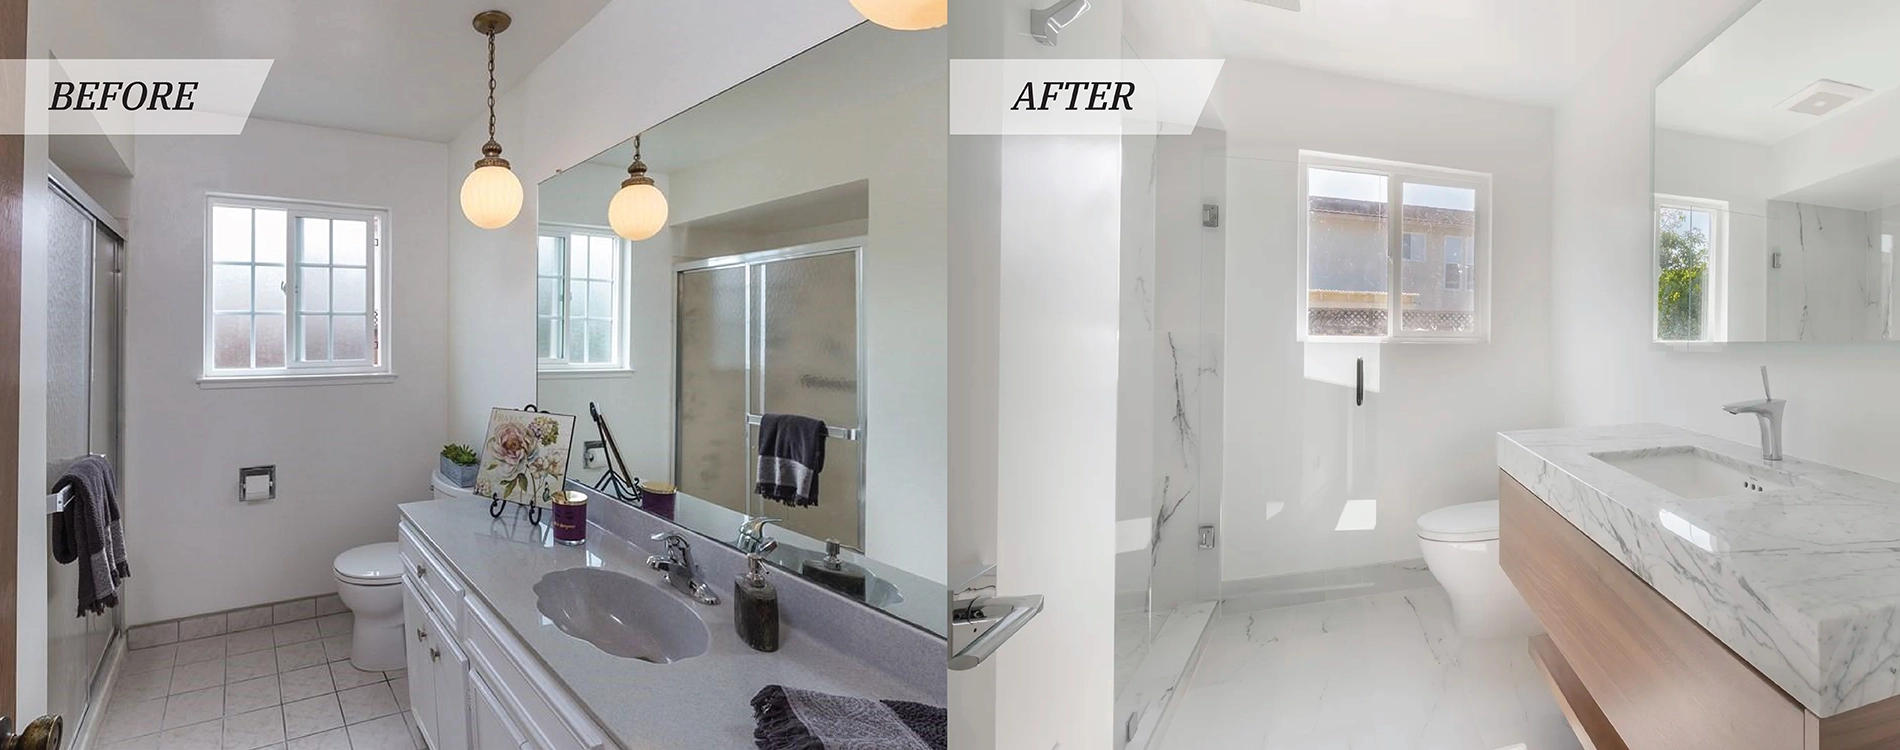 Before and after bathroom remodel project of modern bathroom on Raintree Ct. in San Jose, CA